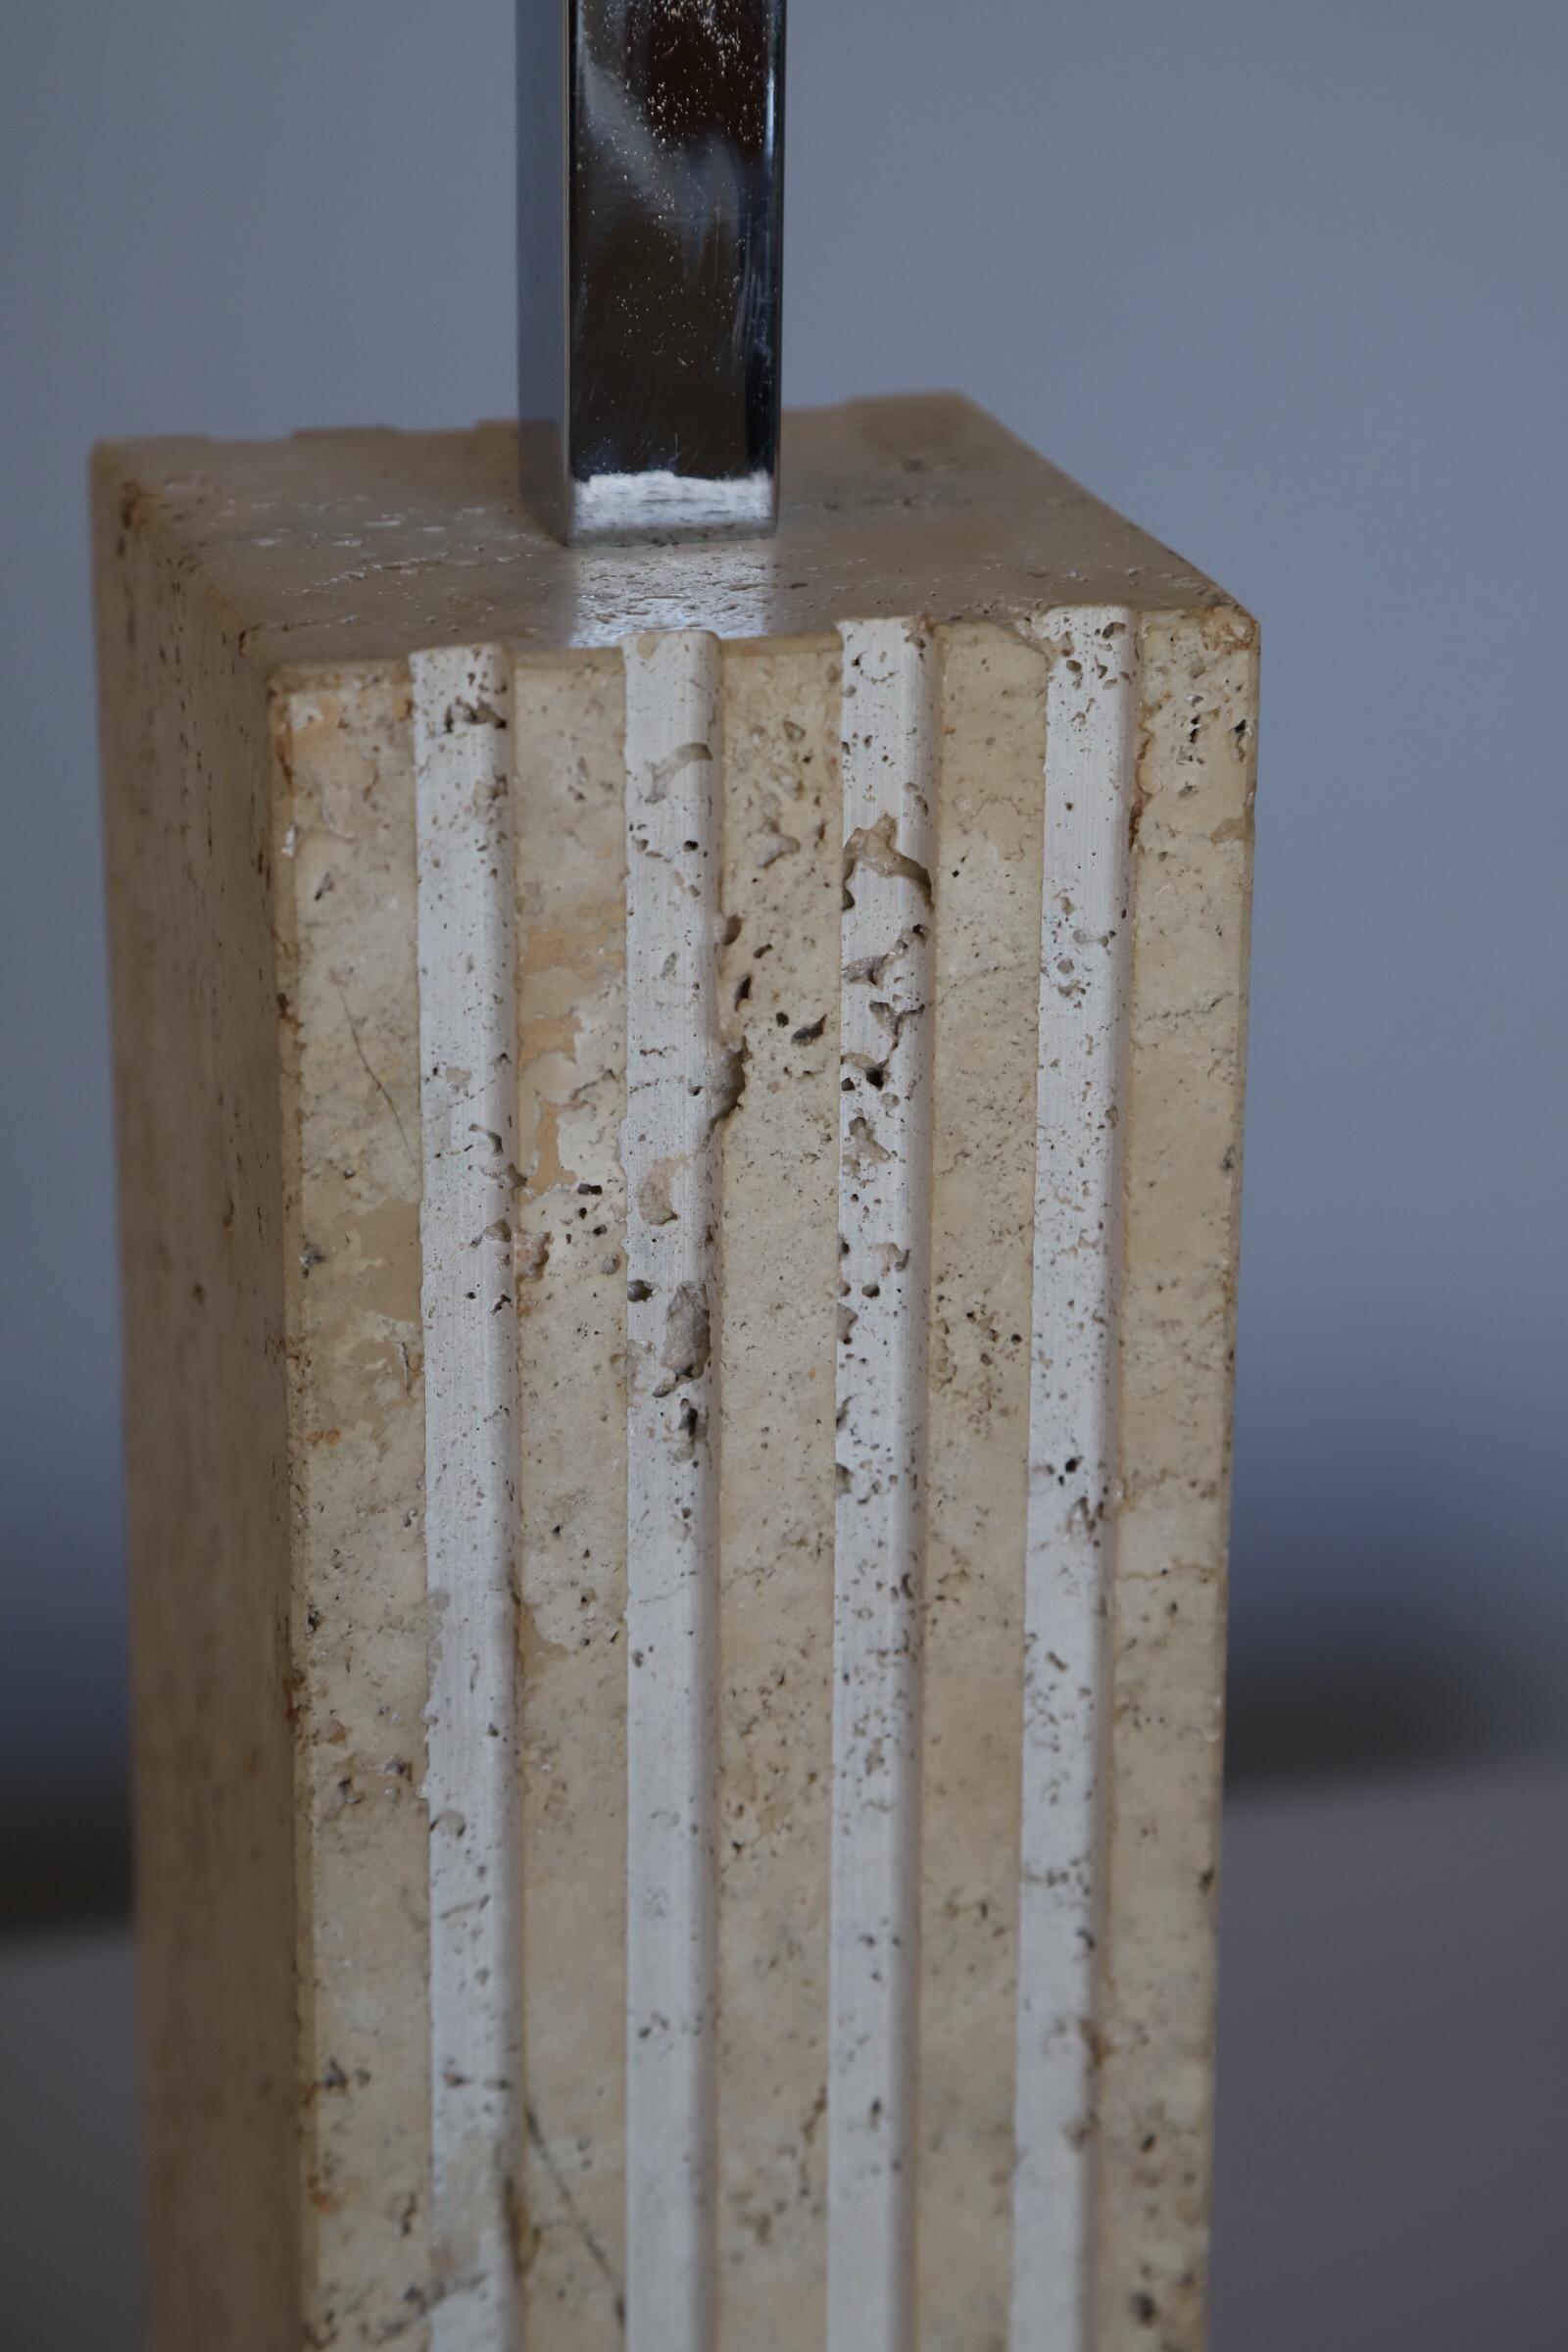 Wonderful solid travertine table lamp by Raymor of Italy. A simple and distinct look with fluting on two sides of the body.